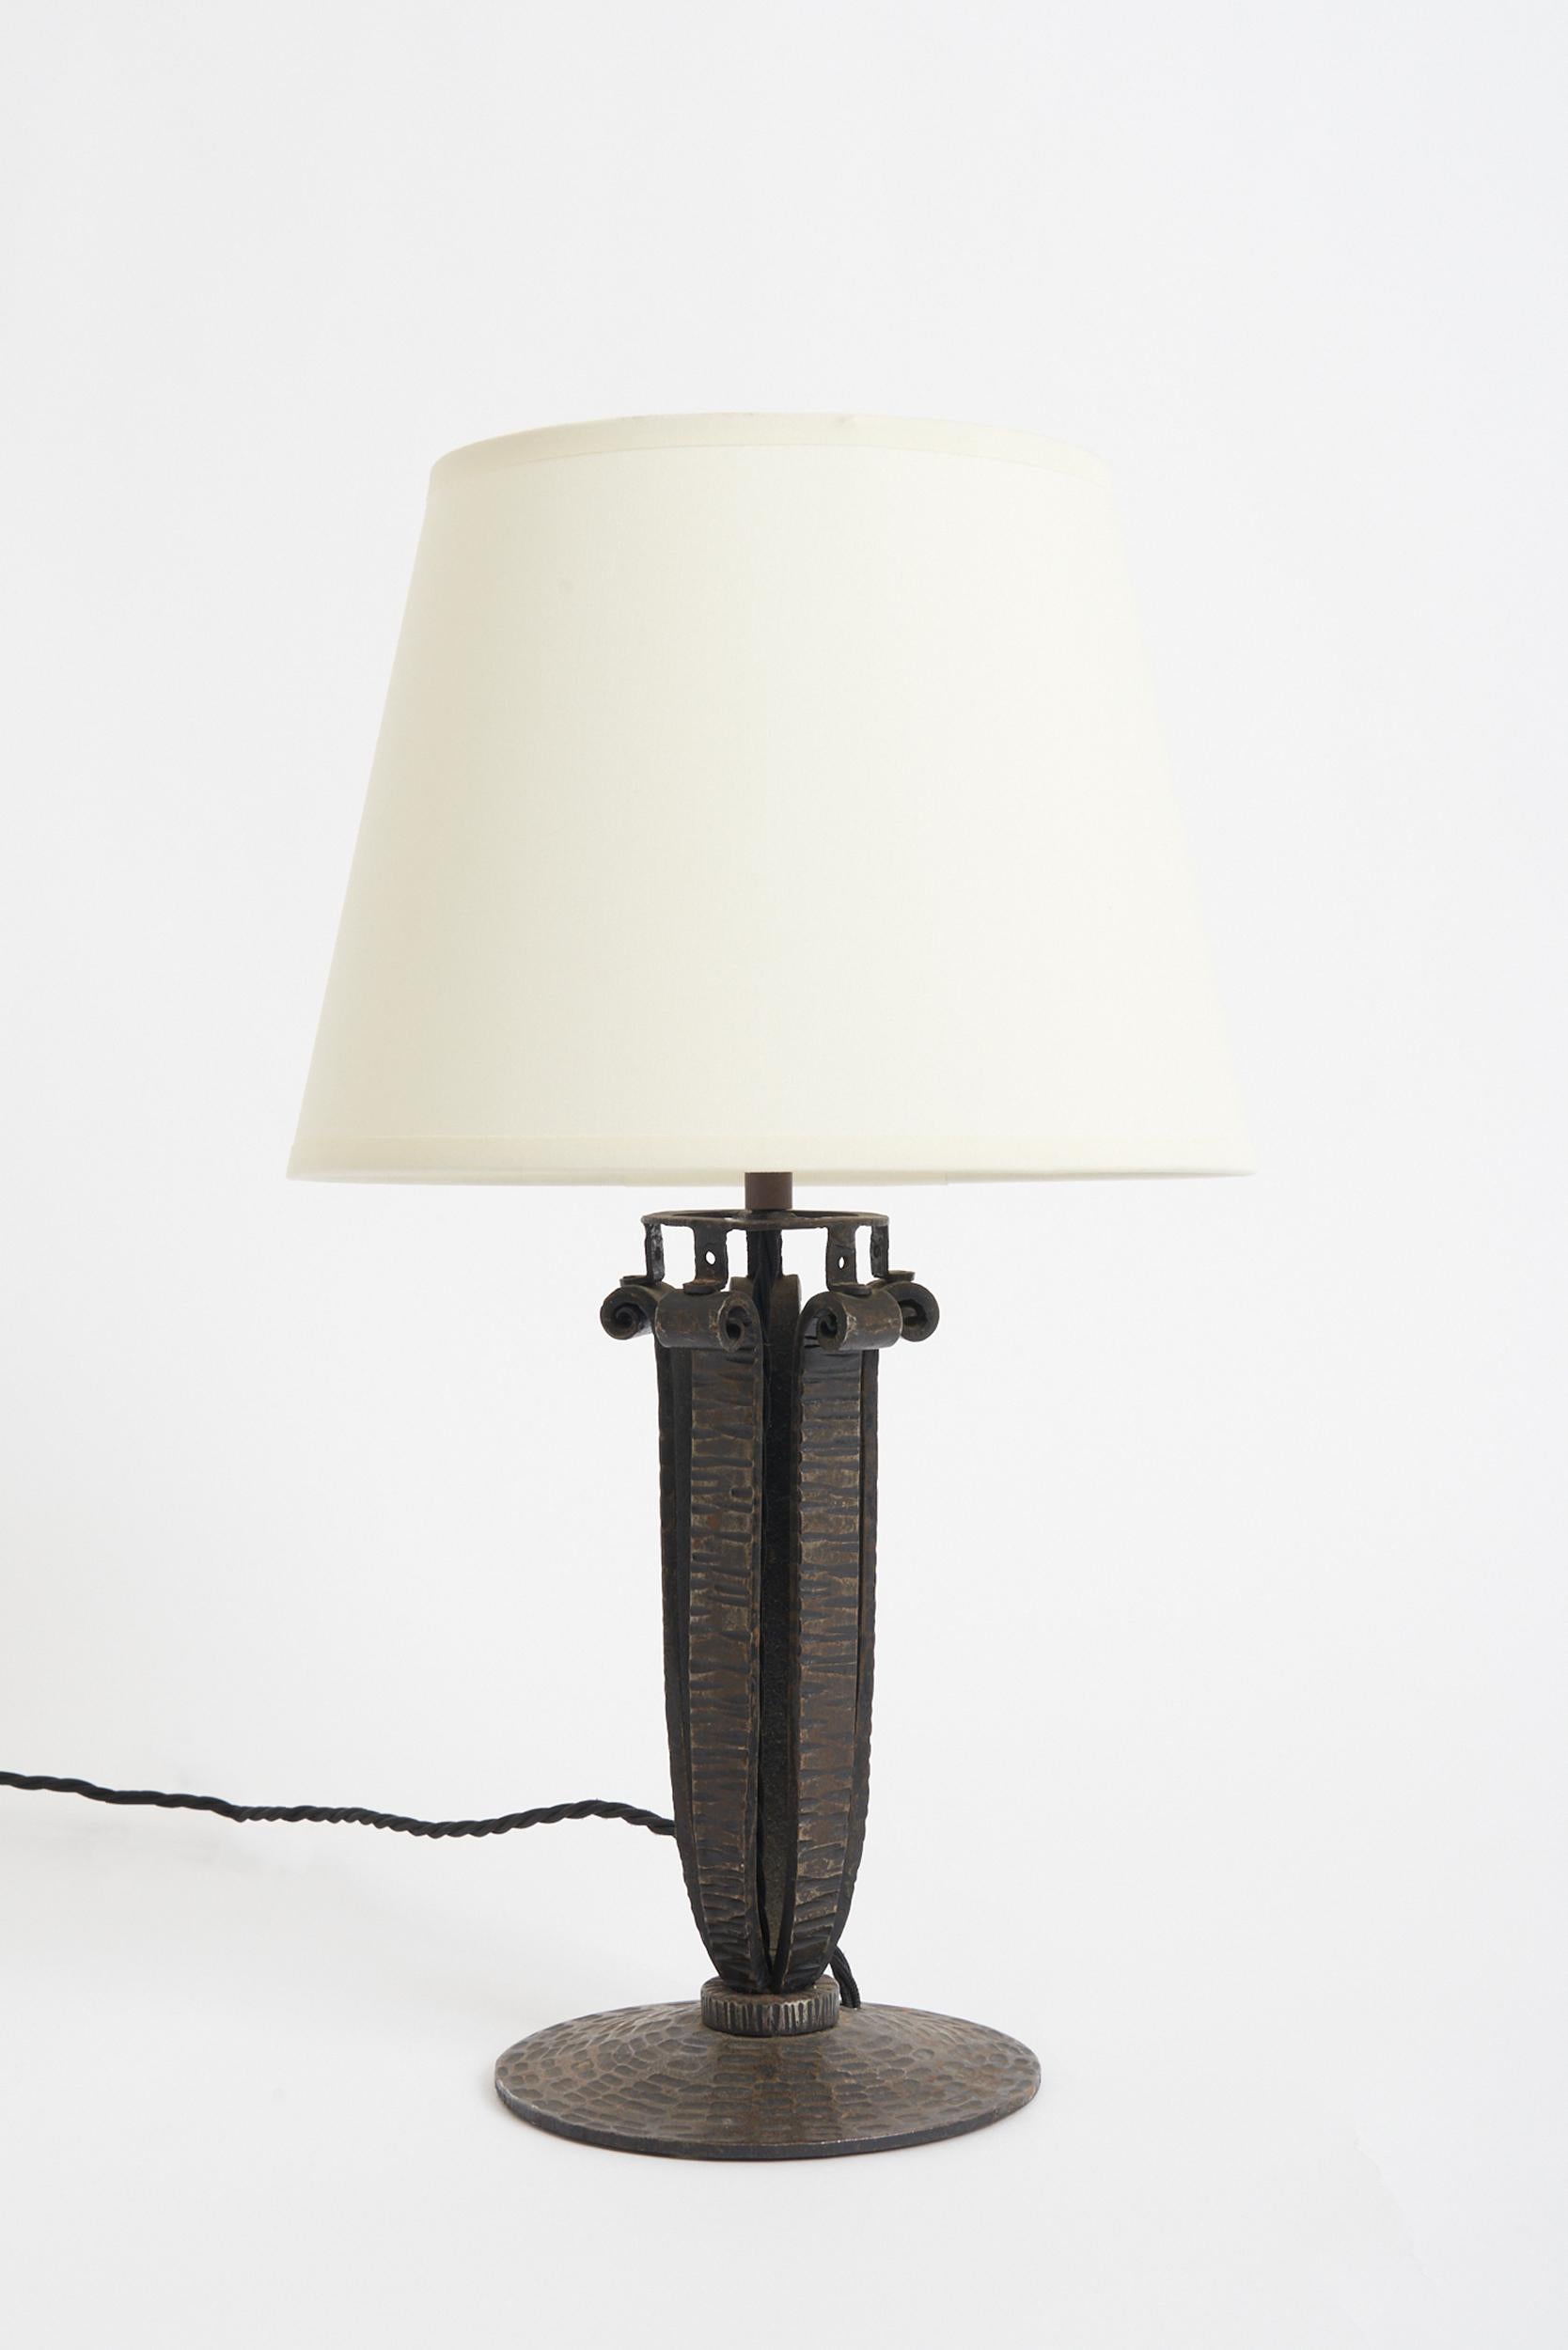 An Art Deco wrought iron table lamp
France, circa 1930
With the shade: 41.5 cm high by 25.5 cm diameter 
Lamp base only: 29 cm high by 16 cm diameter.